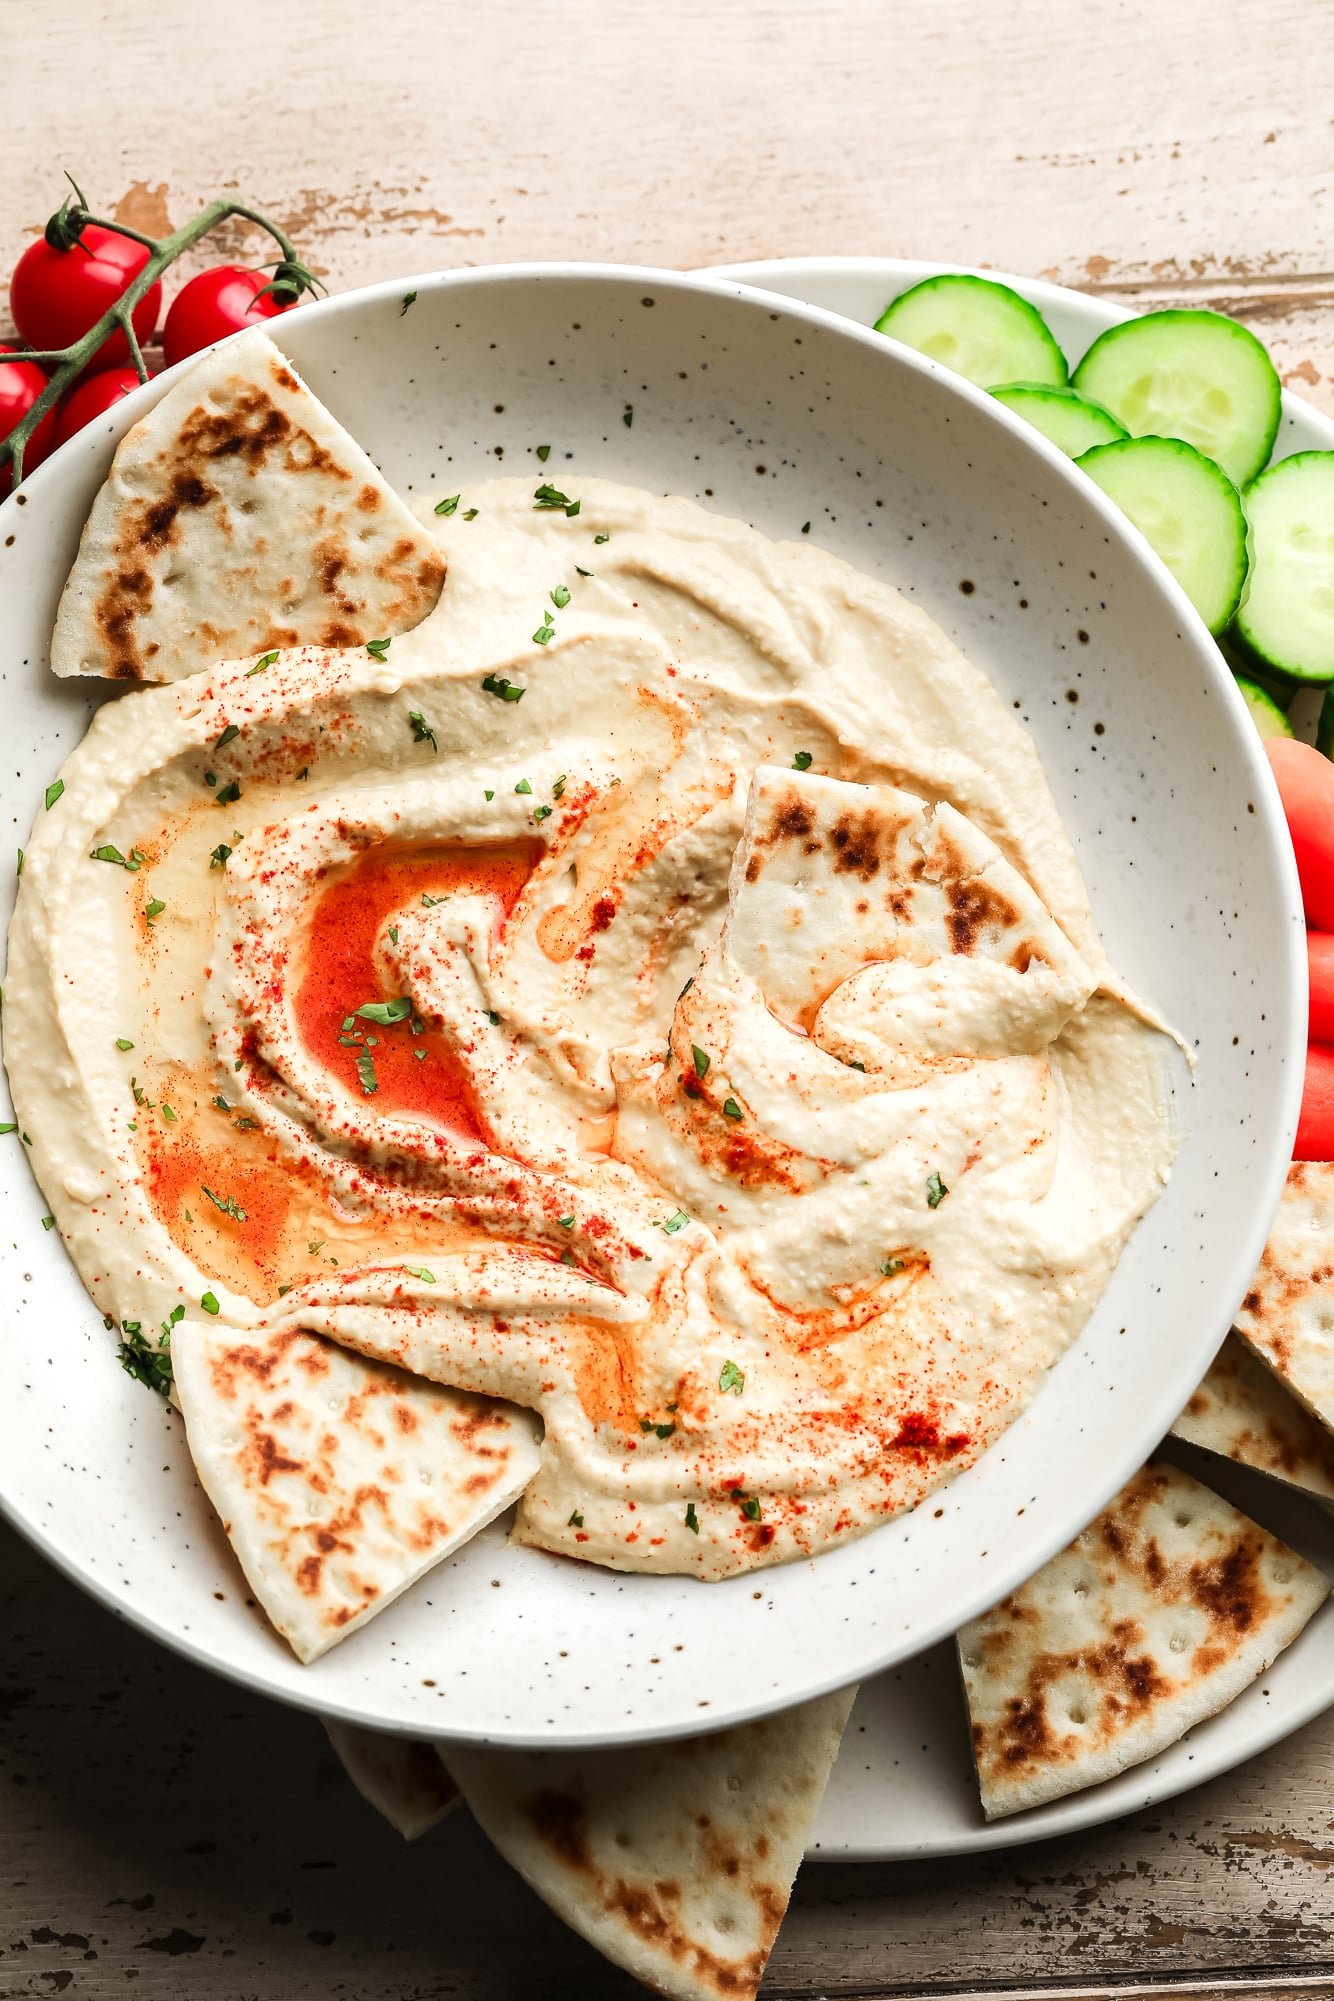 hummus topped with paprika and oil in a white bowl with pita bread and vegetables on the side.